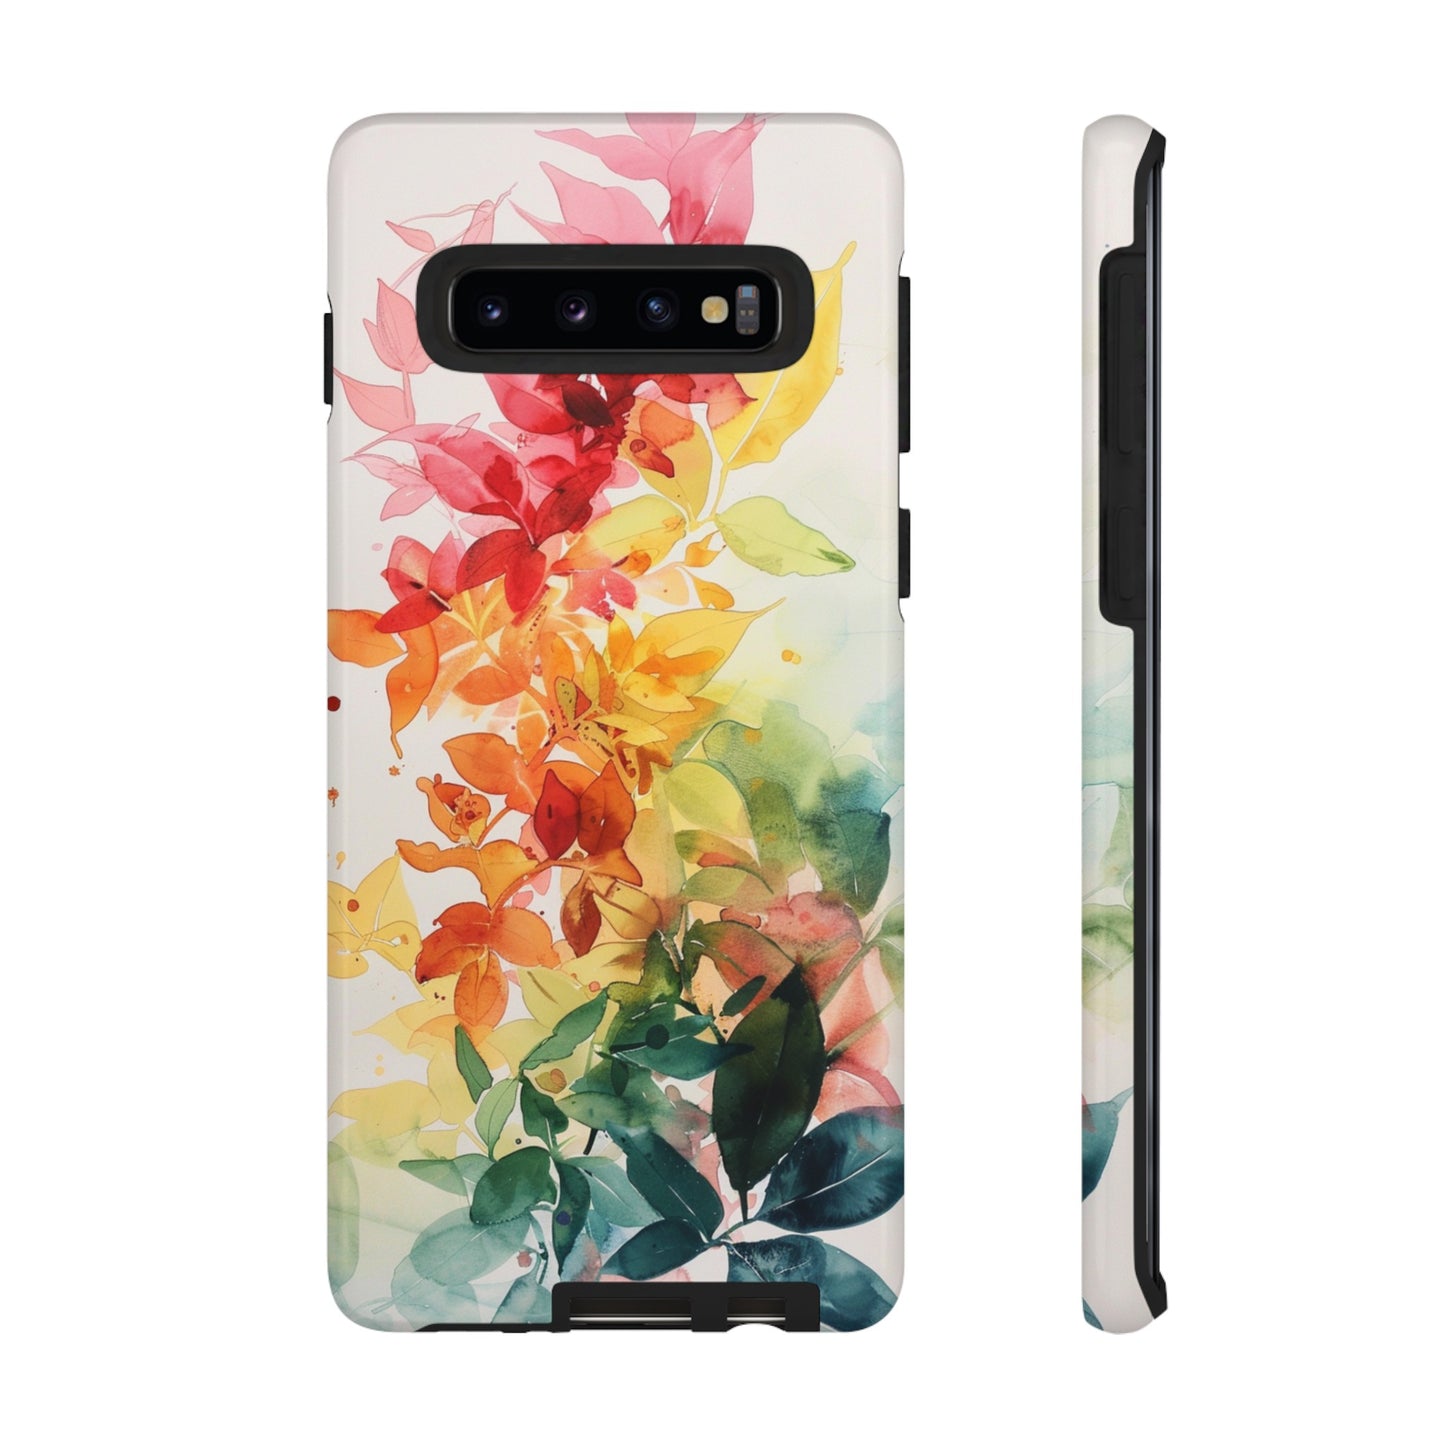 iPhone SE case with watercolor design